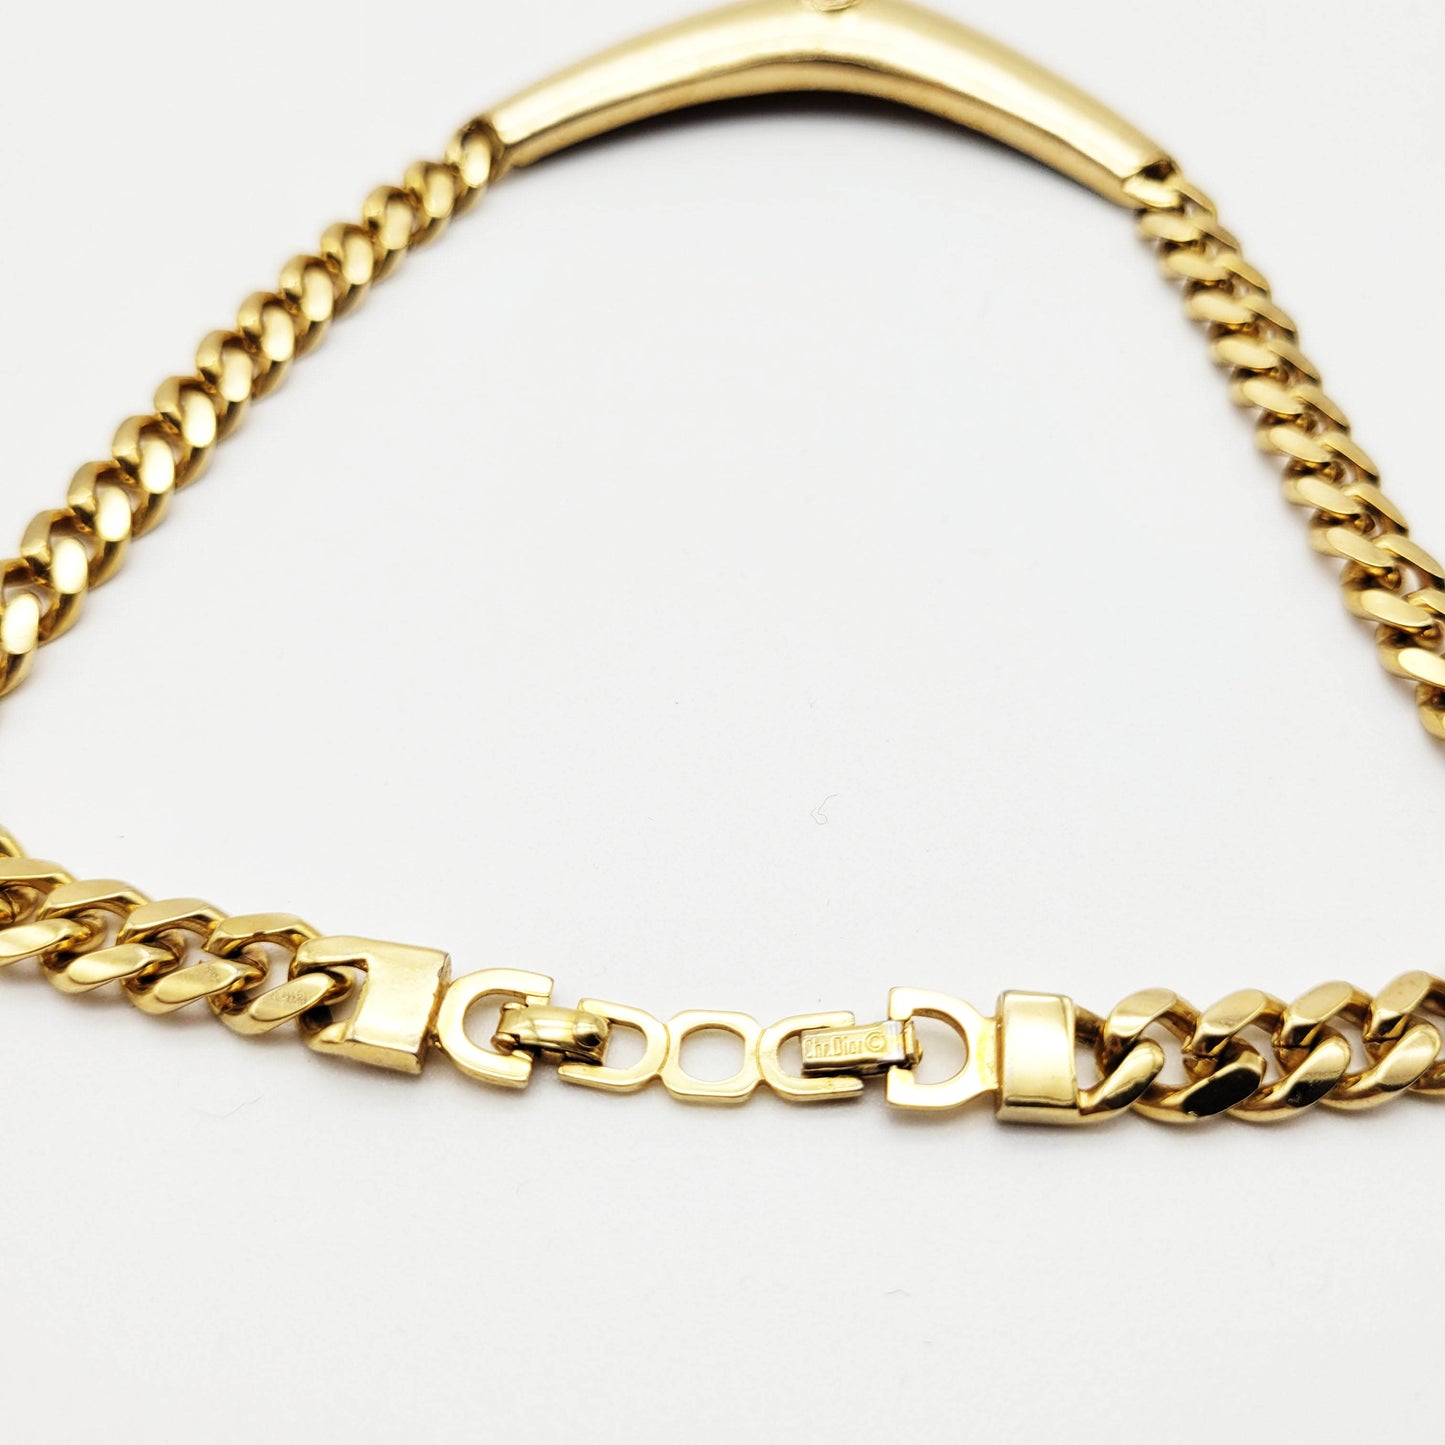 Vintage chain necklace Christian Dior